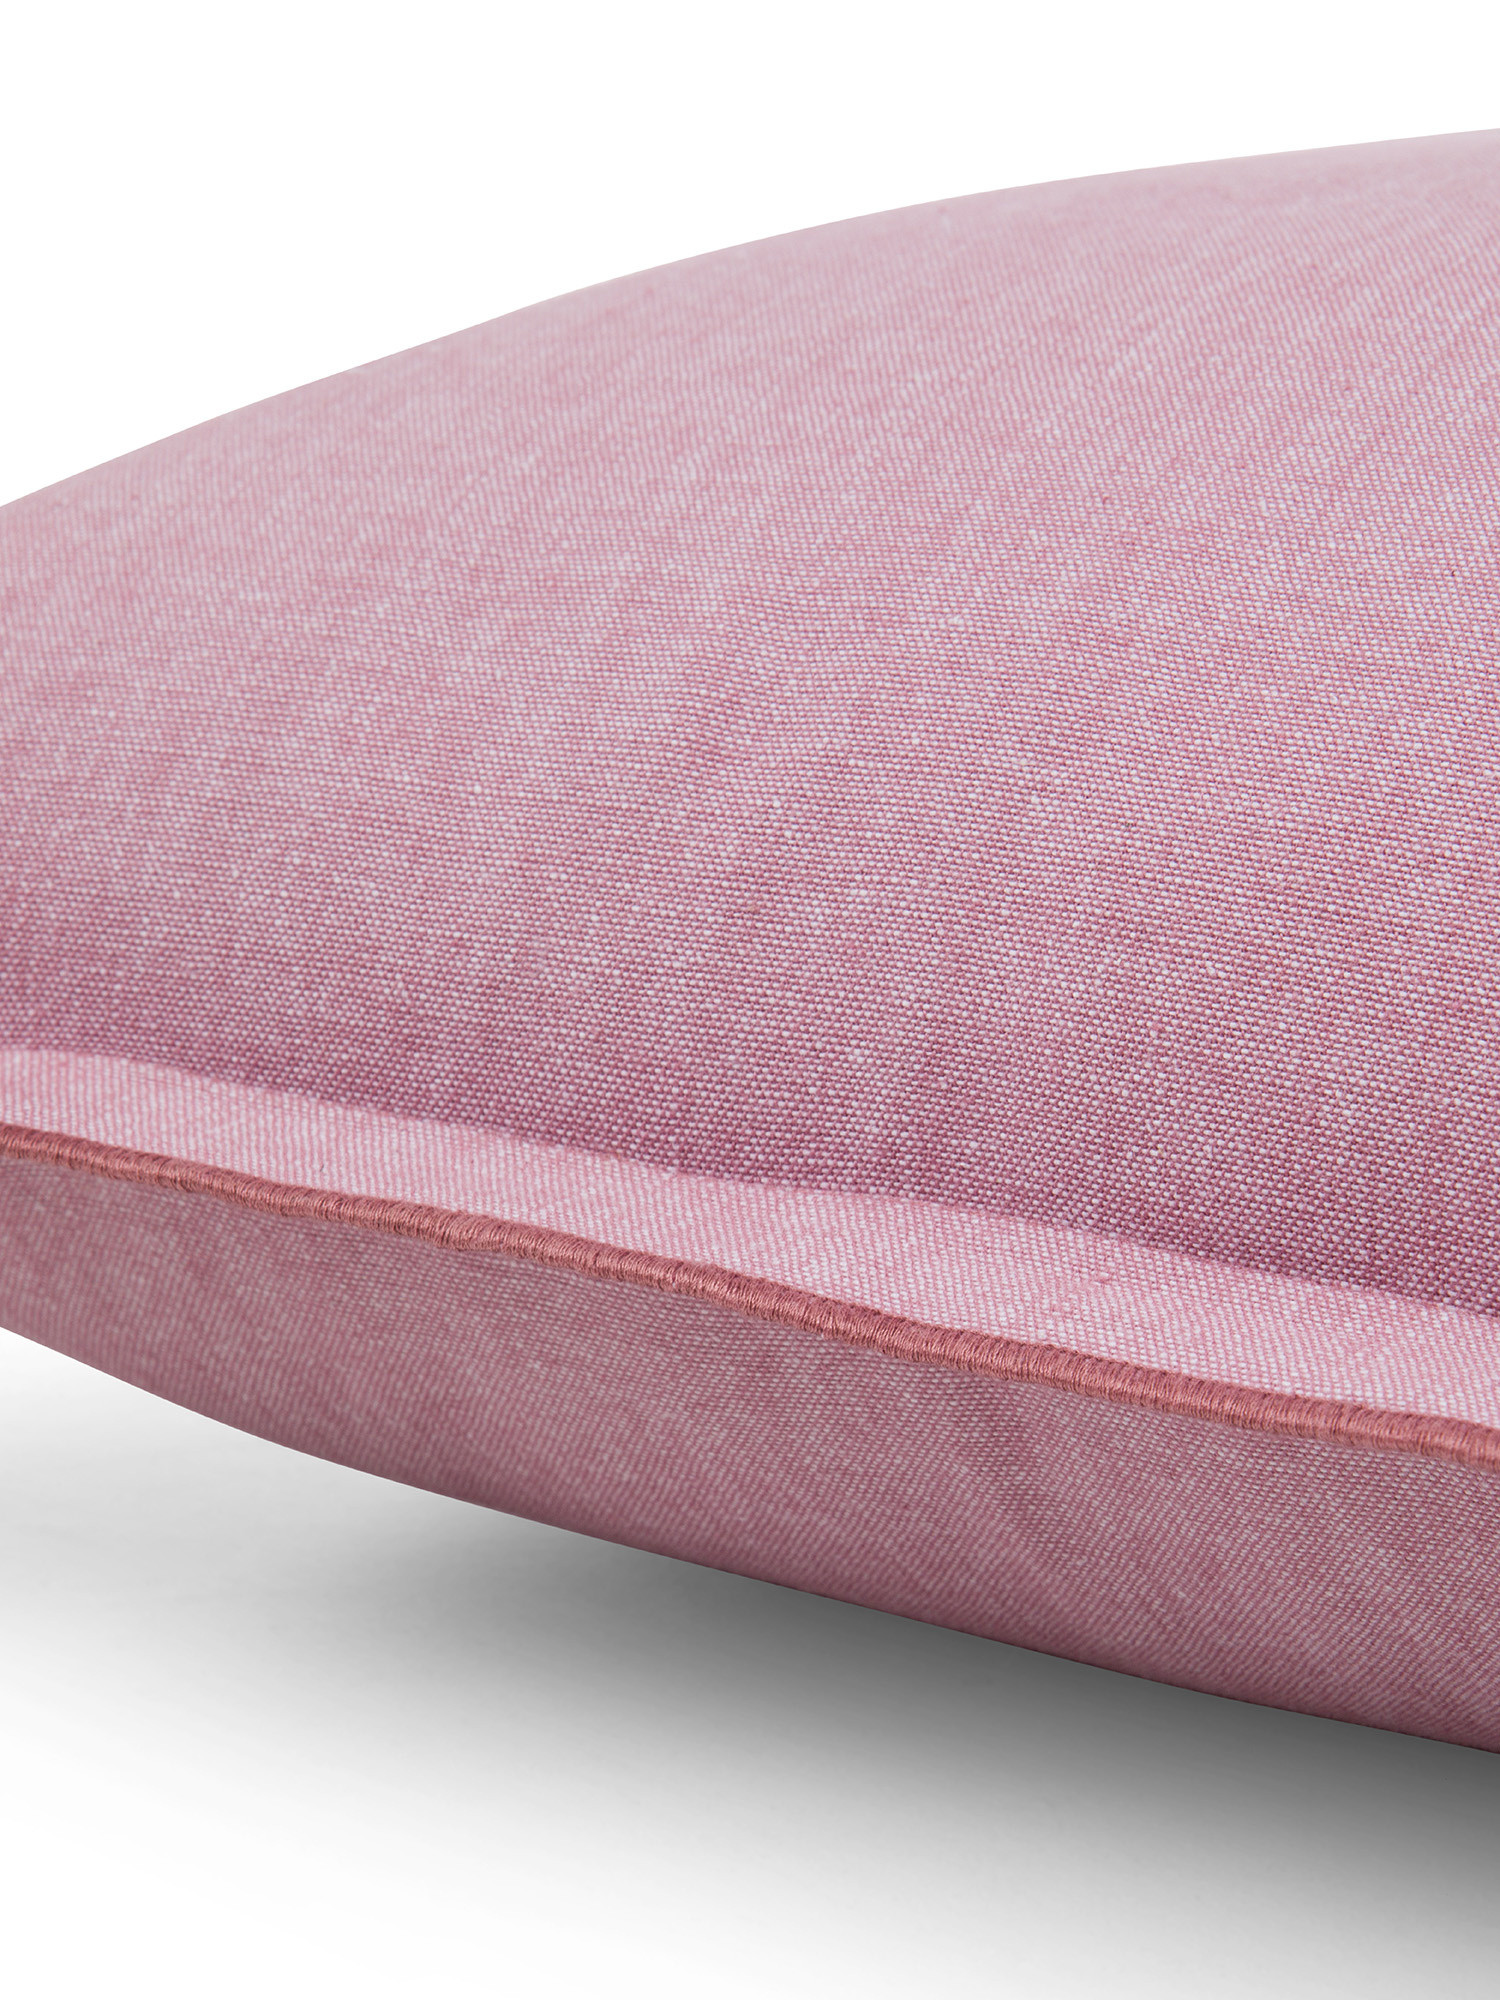 Chambray cotton cushion 45x45cm, Pink, large image number 2